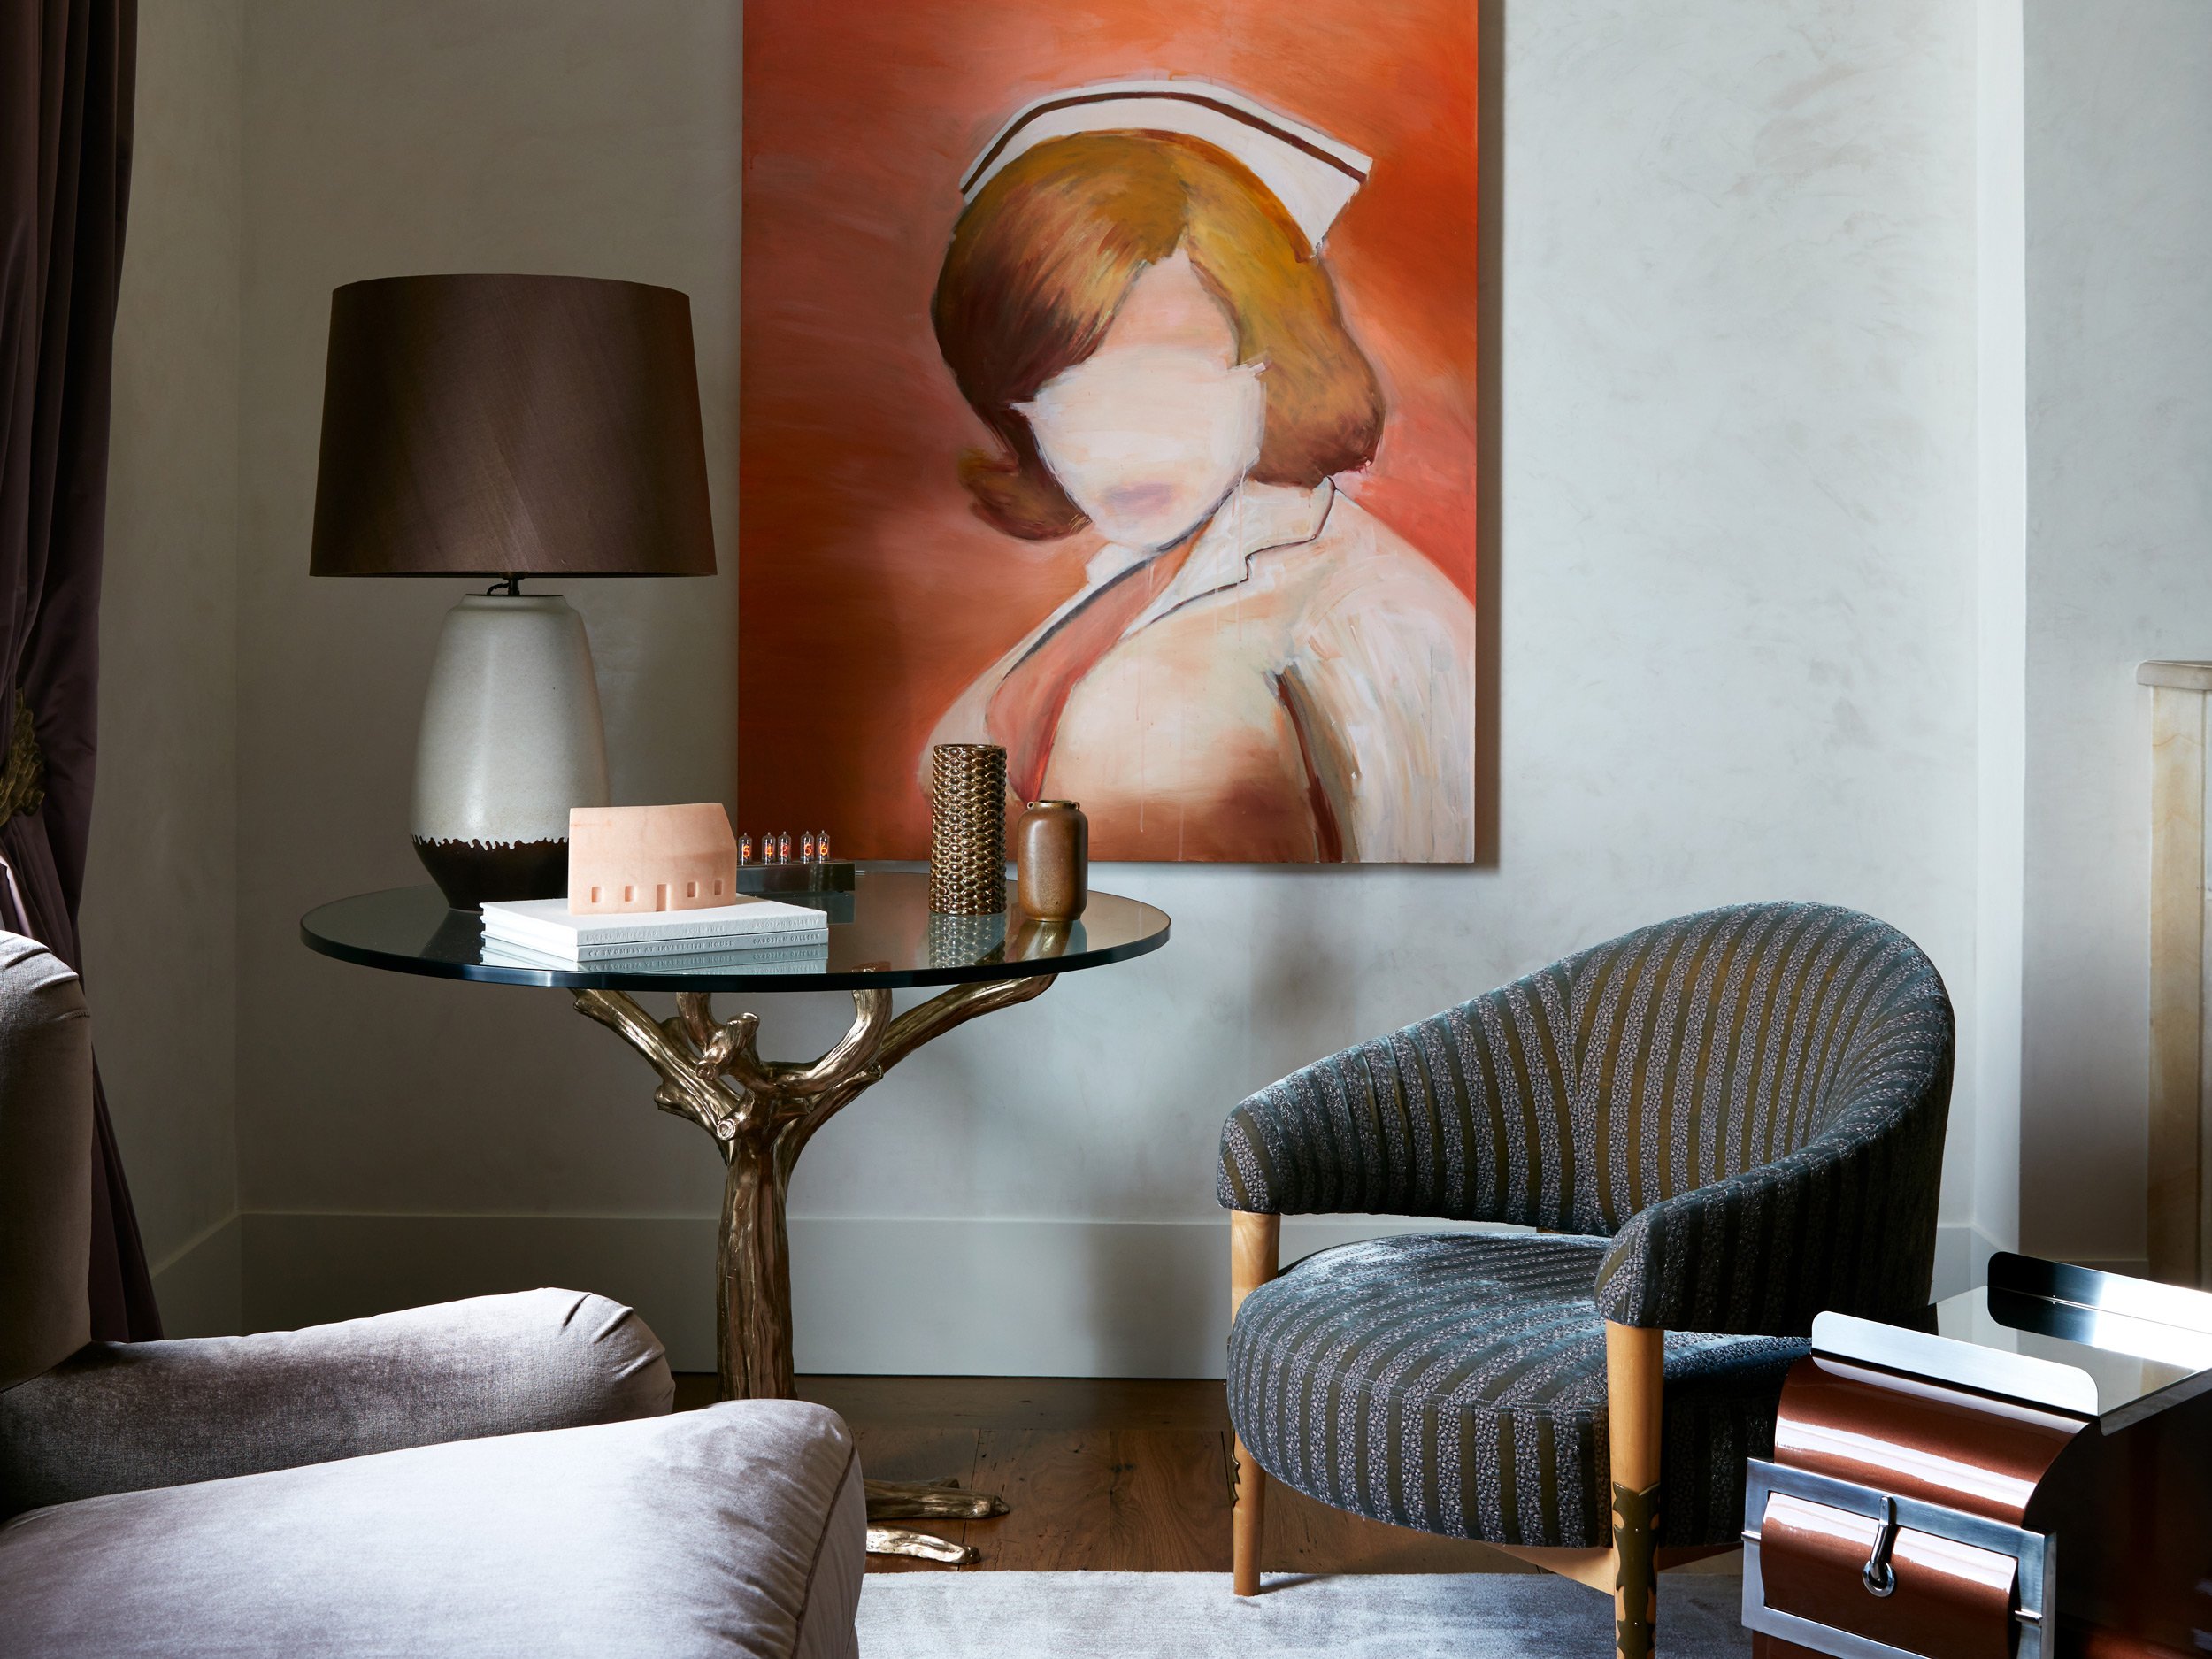 Robert Stilin Designs a Room with a Richard Prince Work as Its